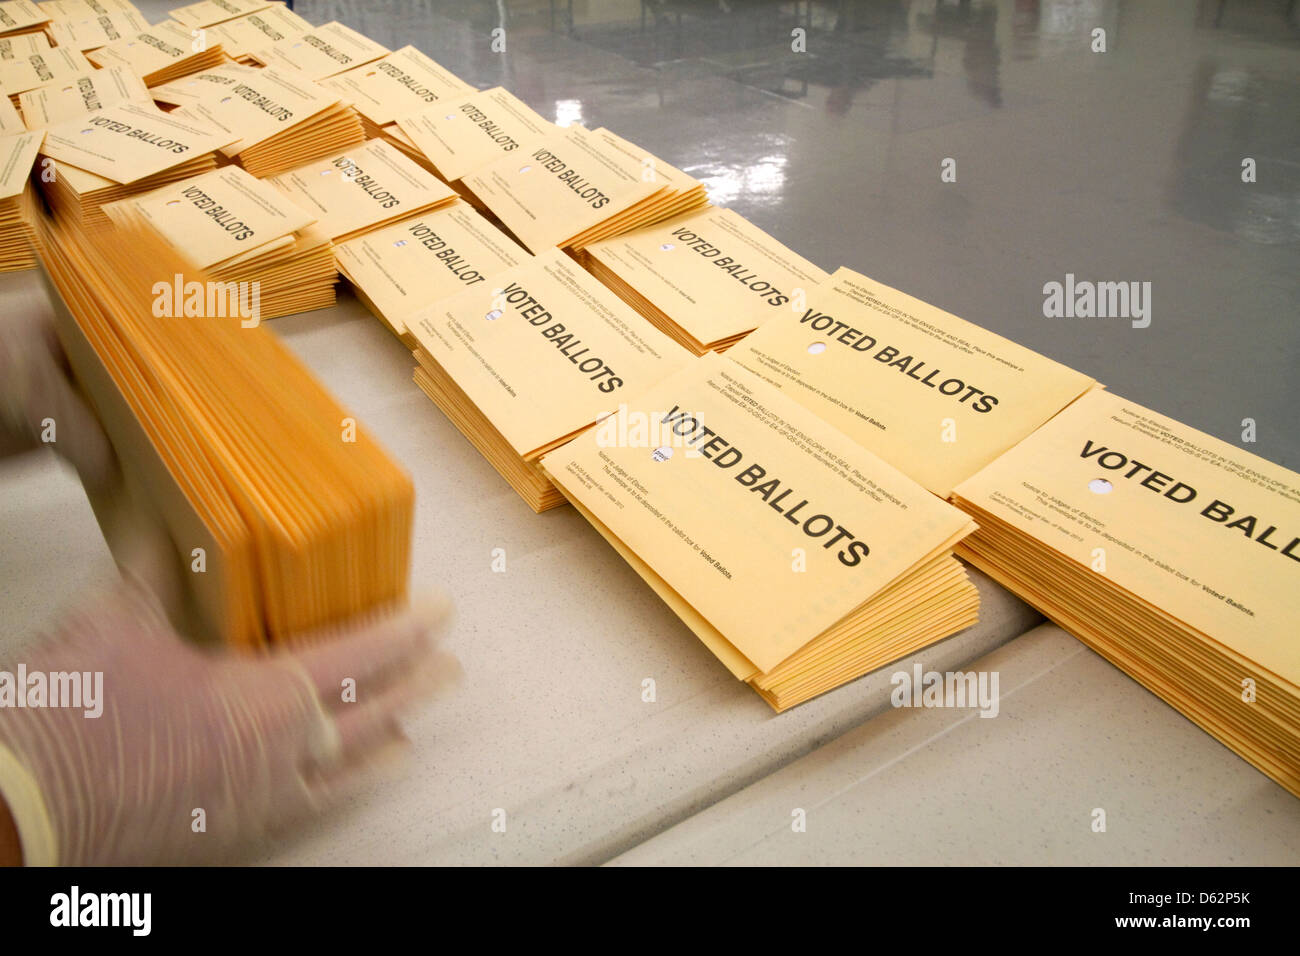 Absentee ballots being sorted and prepared for recording at the Ada County Elections building in Boise, Idaho, USA. Stock Photo